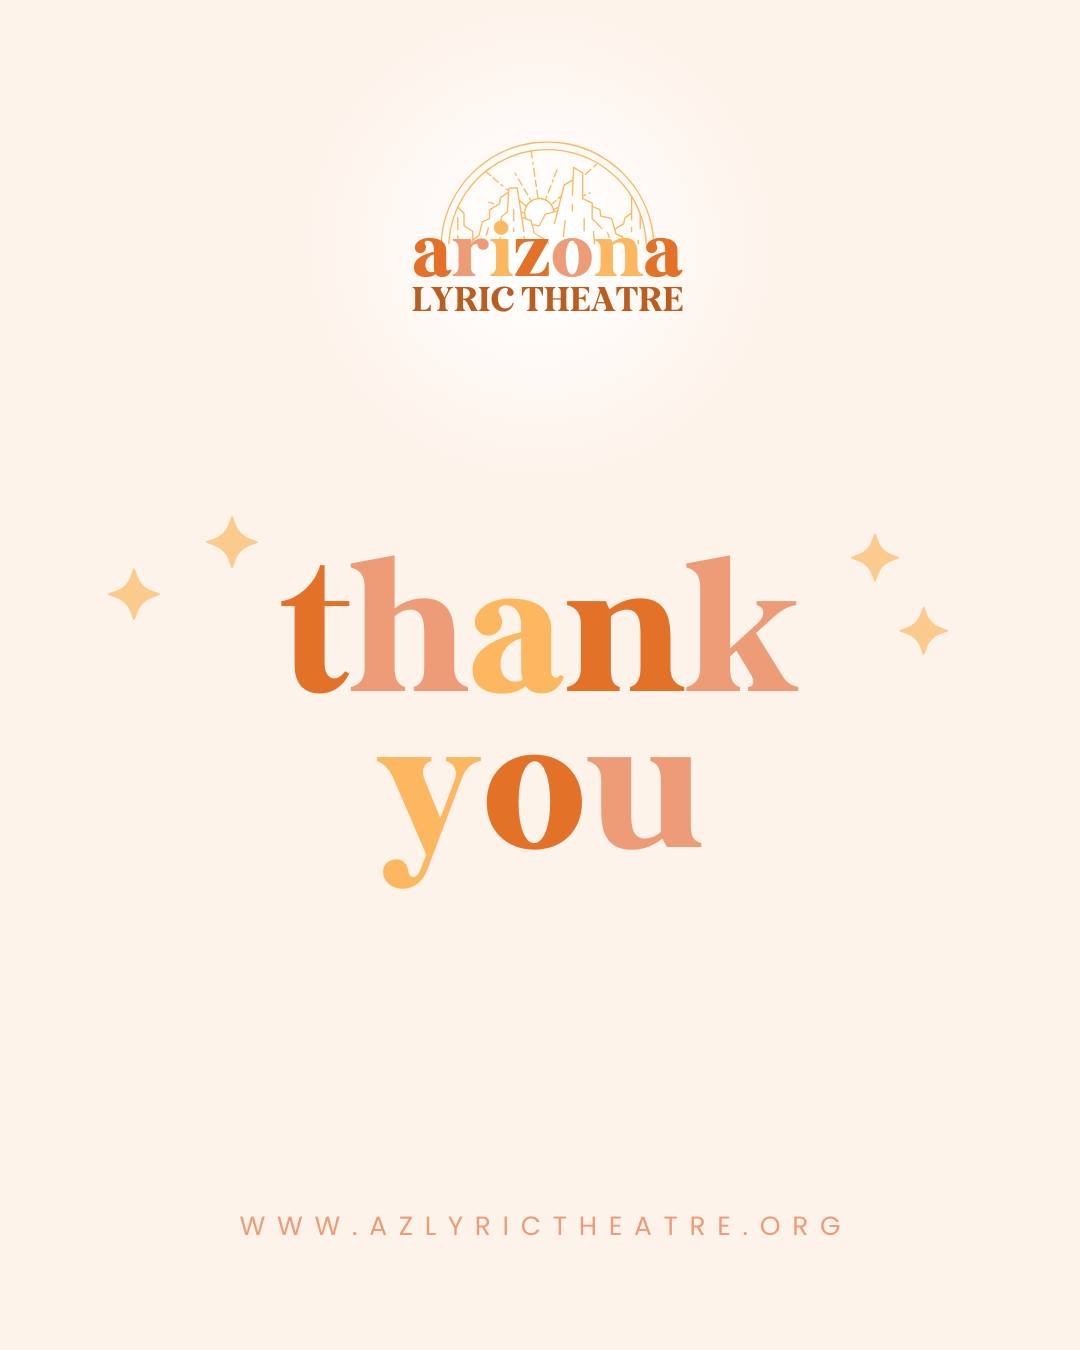 🎉 Thank you to everyone who joined us for &quot;Broadway Beats &amp; Opera Treats&quot;! 🎶 Your support means the world to us, and we're grateful for your presence at this unforgettable musical celebration. Stay tuned for more exciting events and p